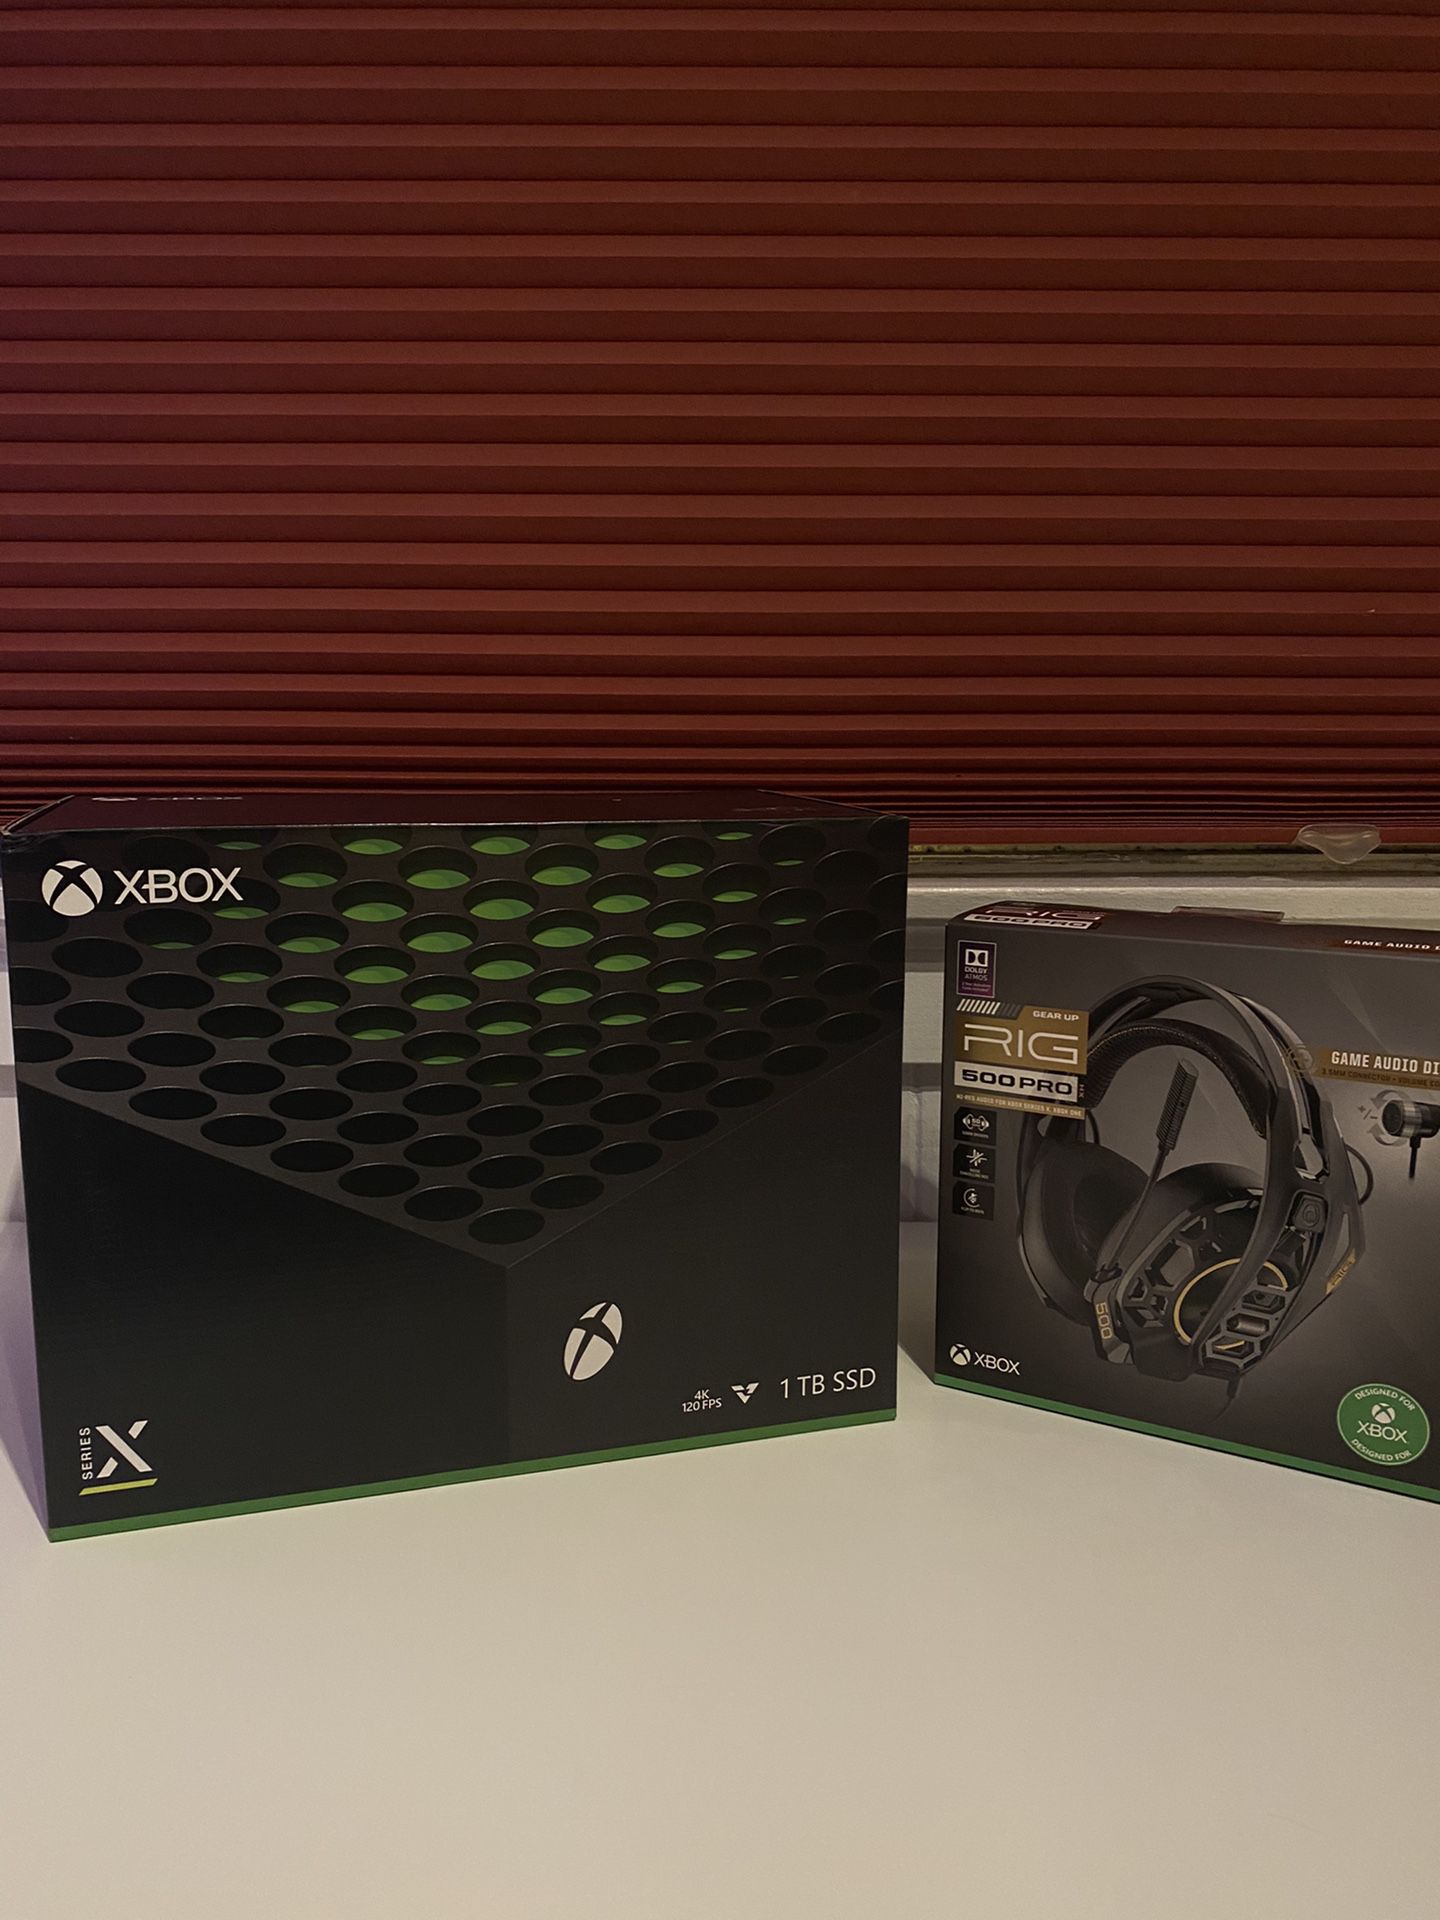 Xbox Series X Bundle w/ Rig 500 Pro Hx Headphones *IN HAND* LOCAL PICKUP OR DELIVERY*